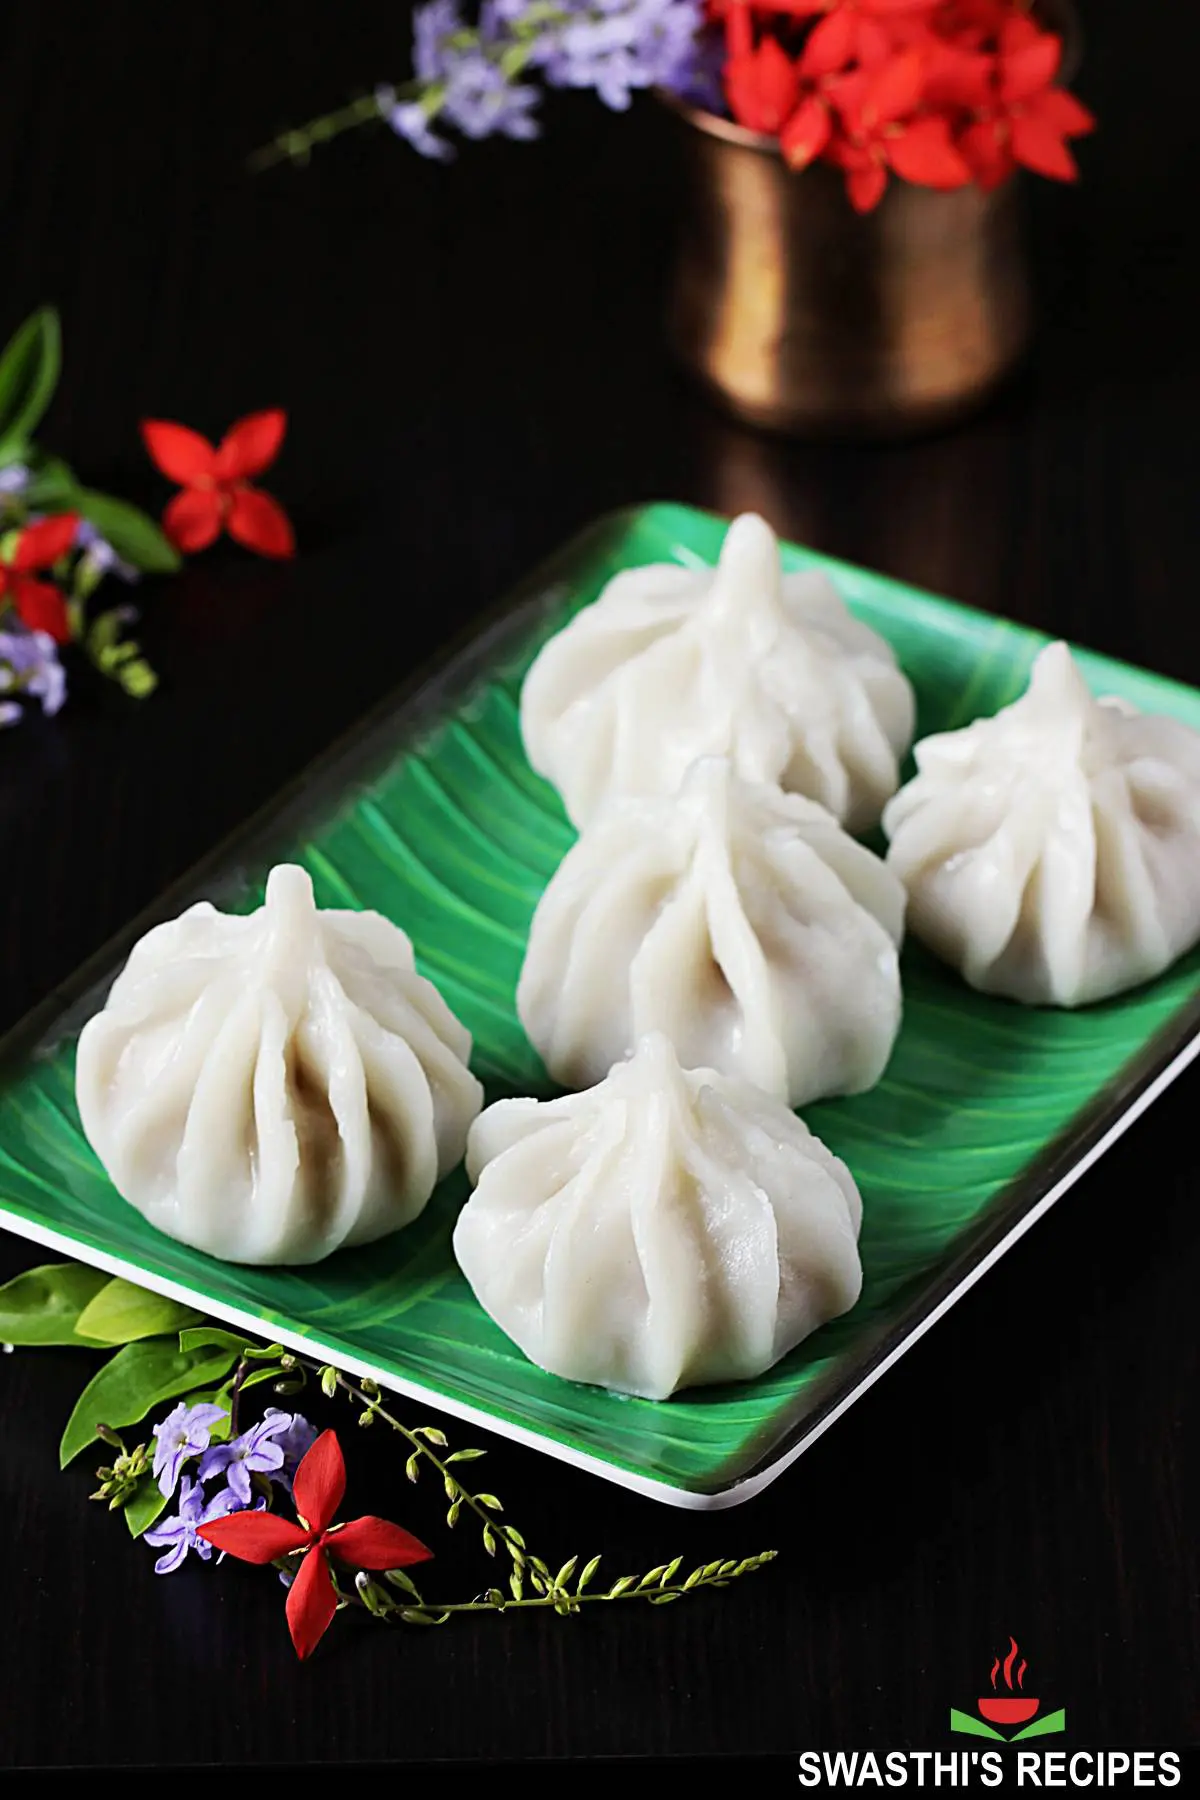 ukadiche modak offered in a green plate during Ganesh Chaturthi pooja